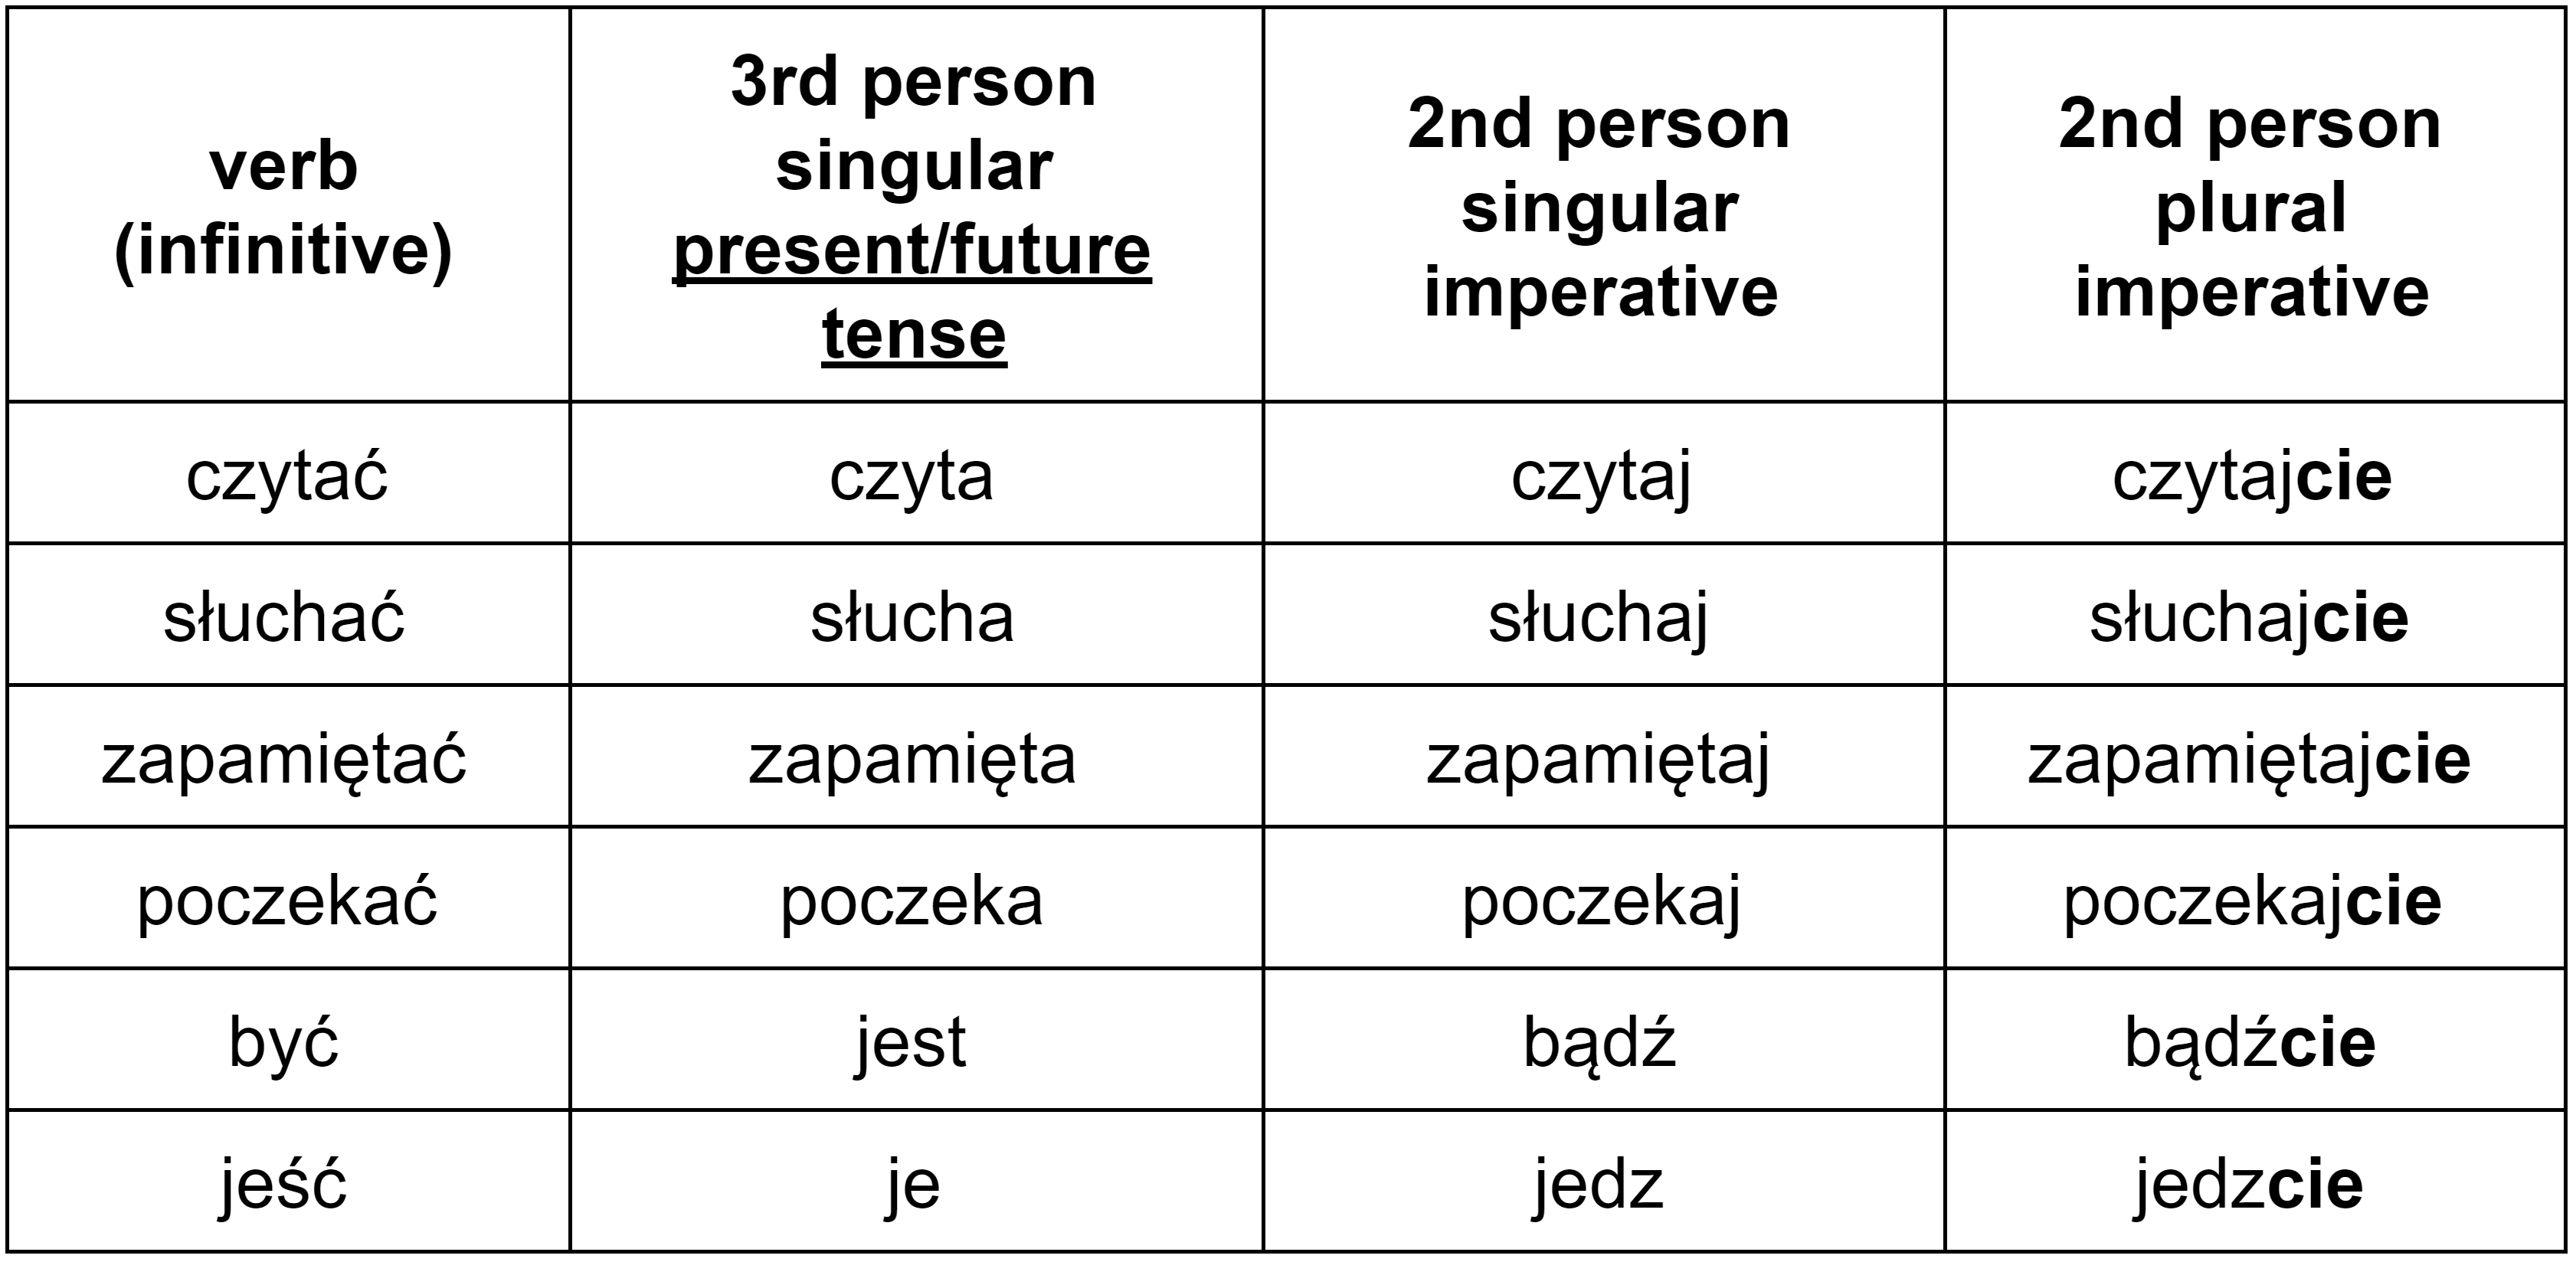 Polish imperative verbs in the second person plural table